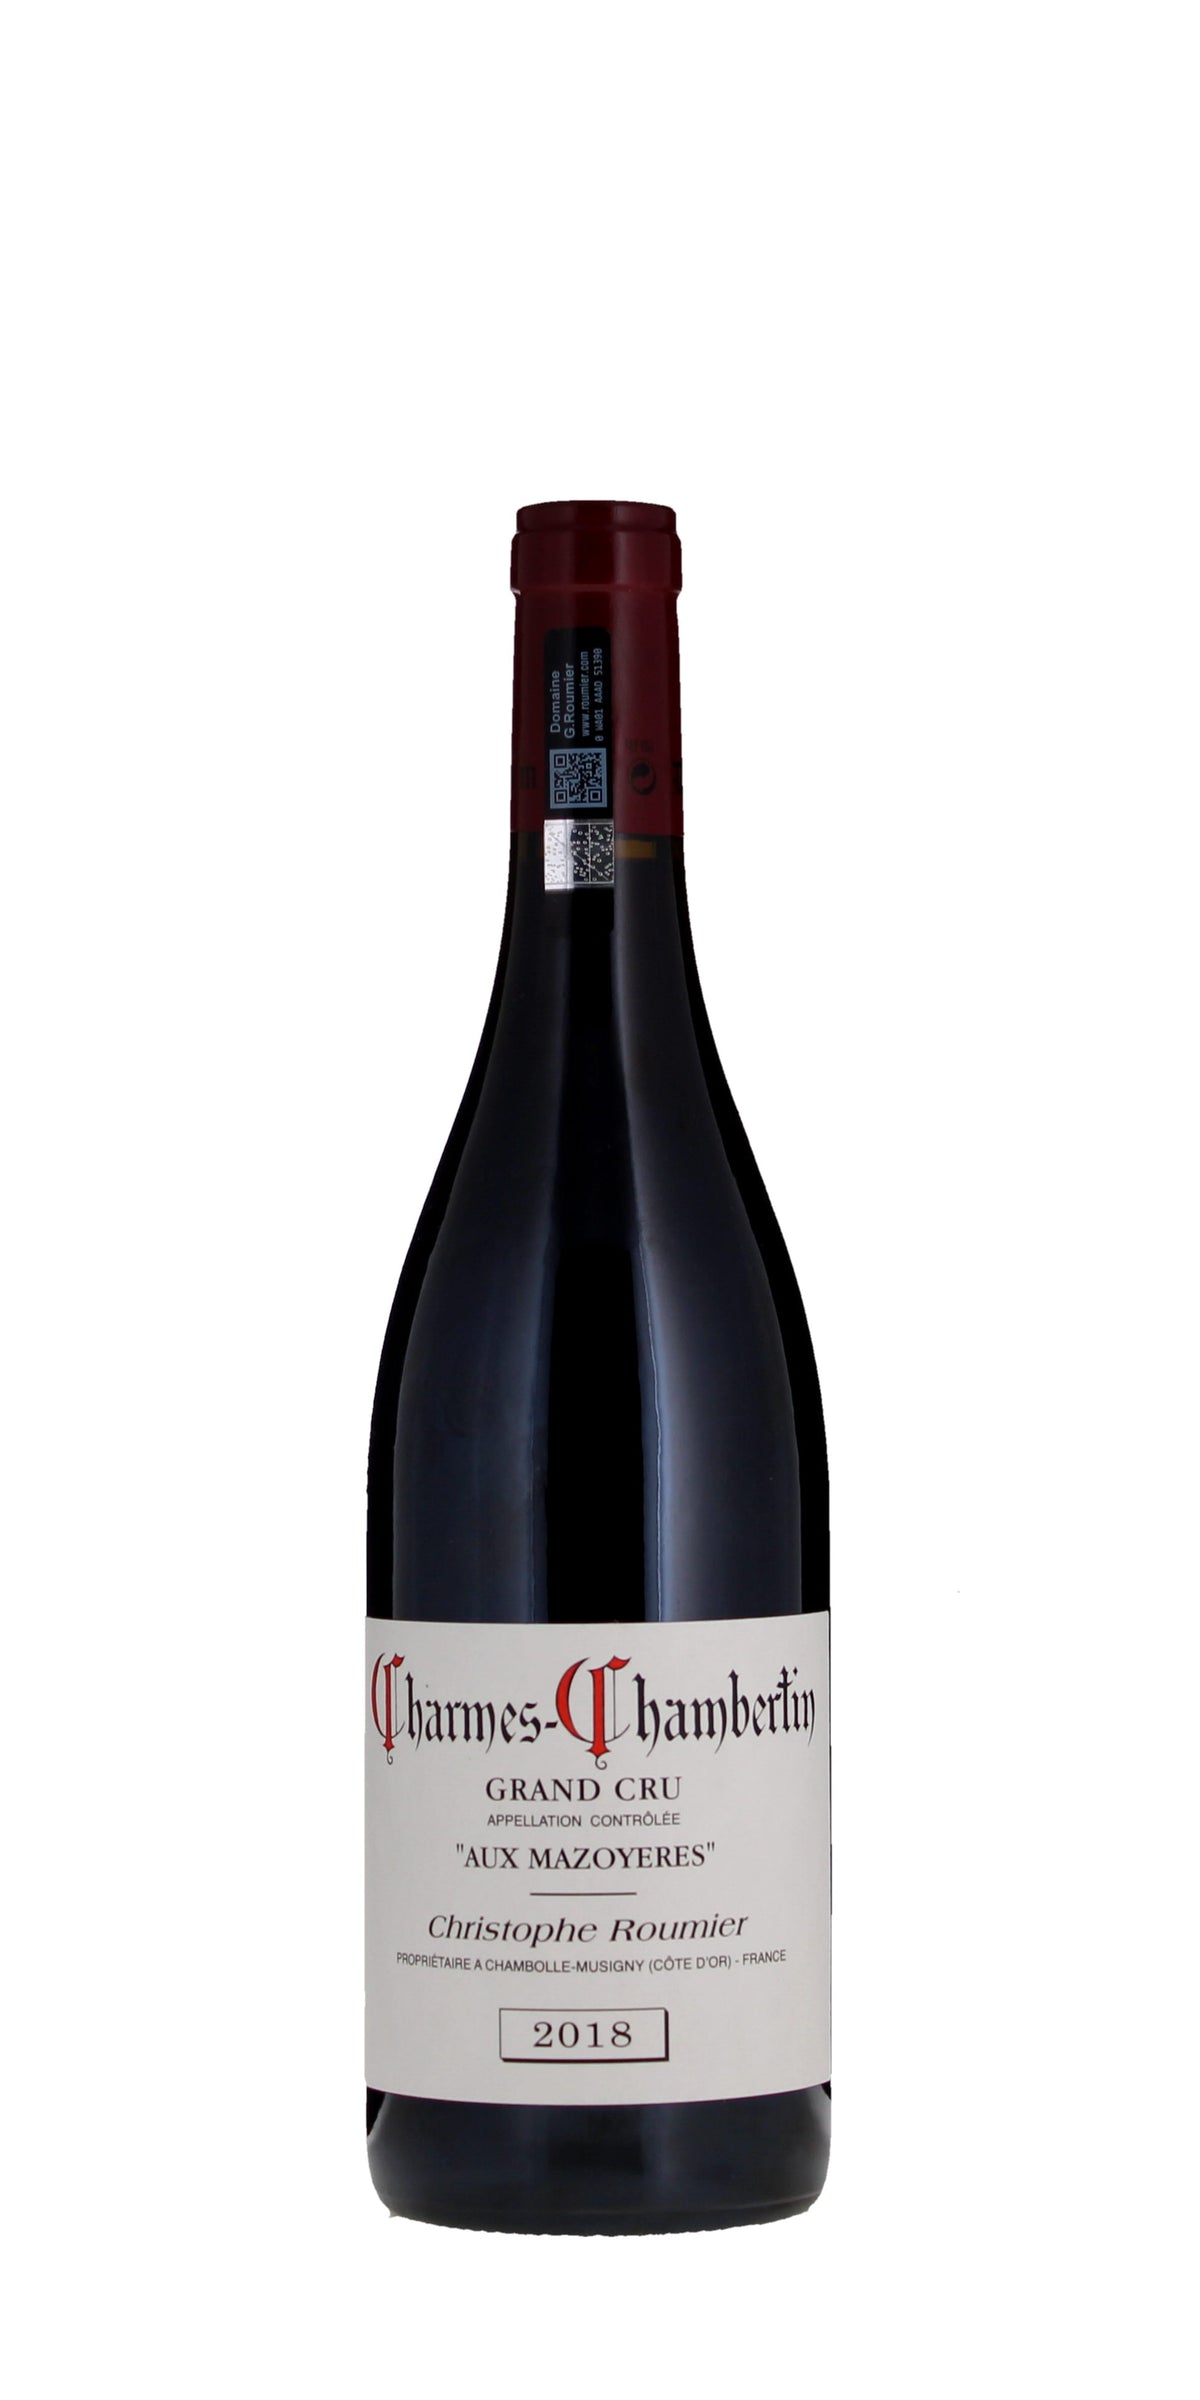 Domaine Georges & Christophe Roumier Charmes-Chambertin Grand Cru Aux Mazoyeres, France 2018